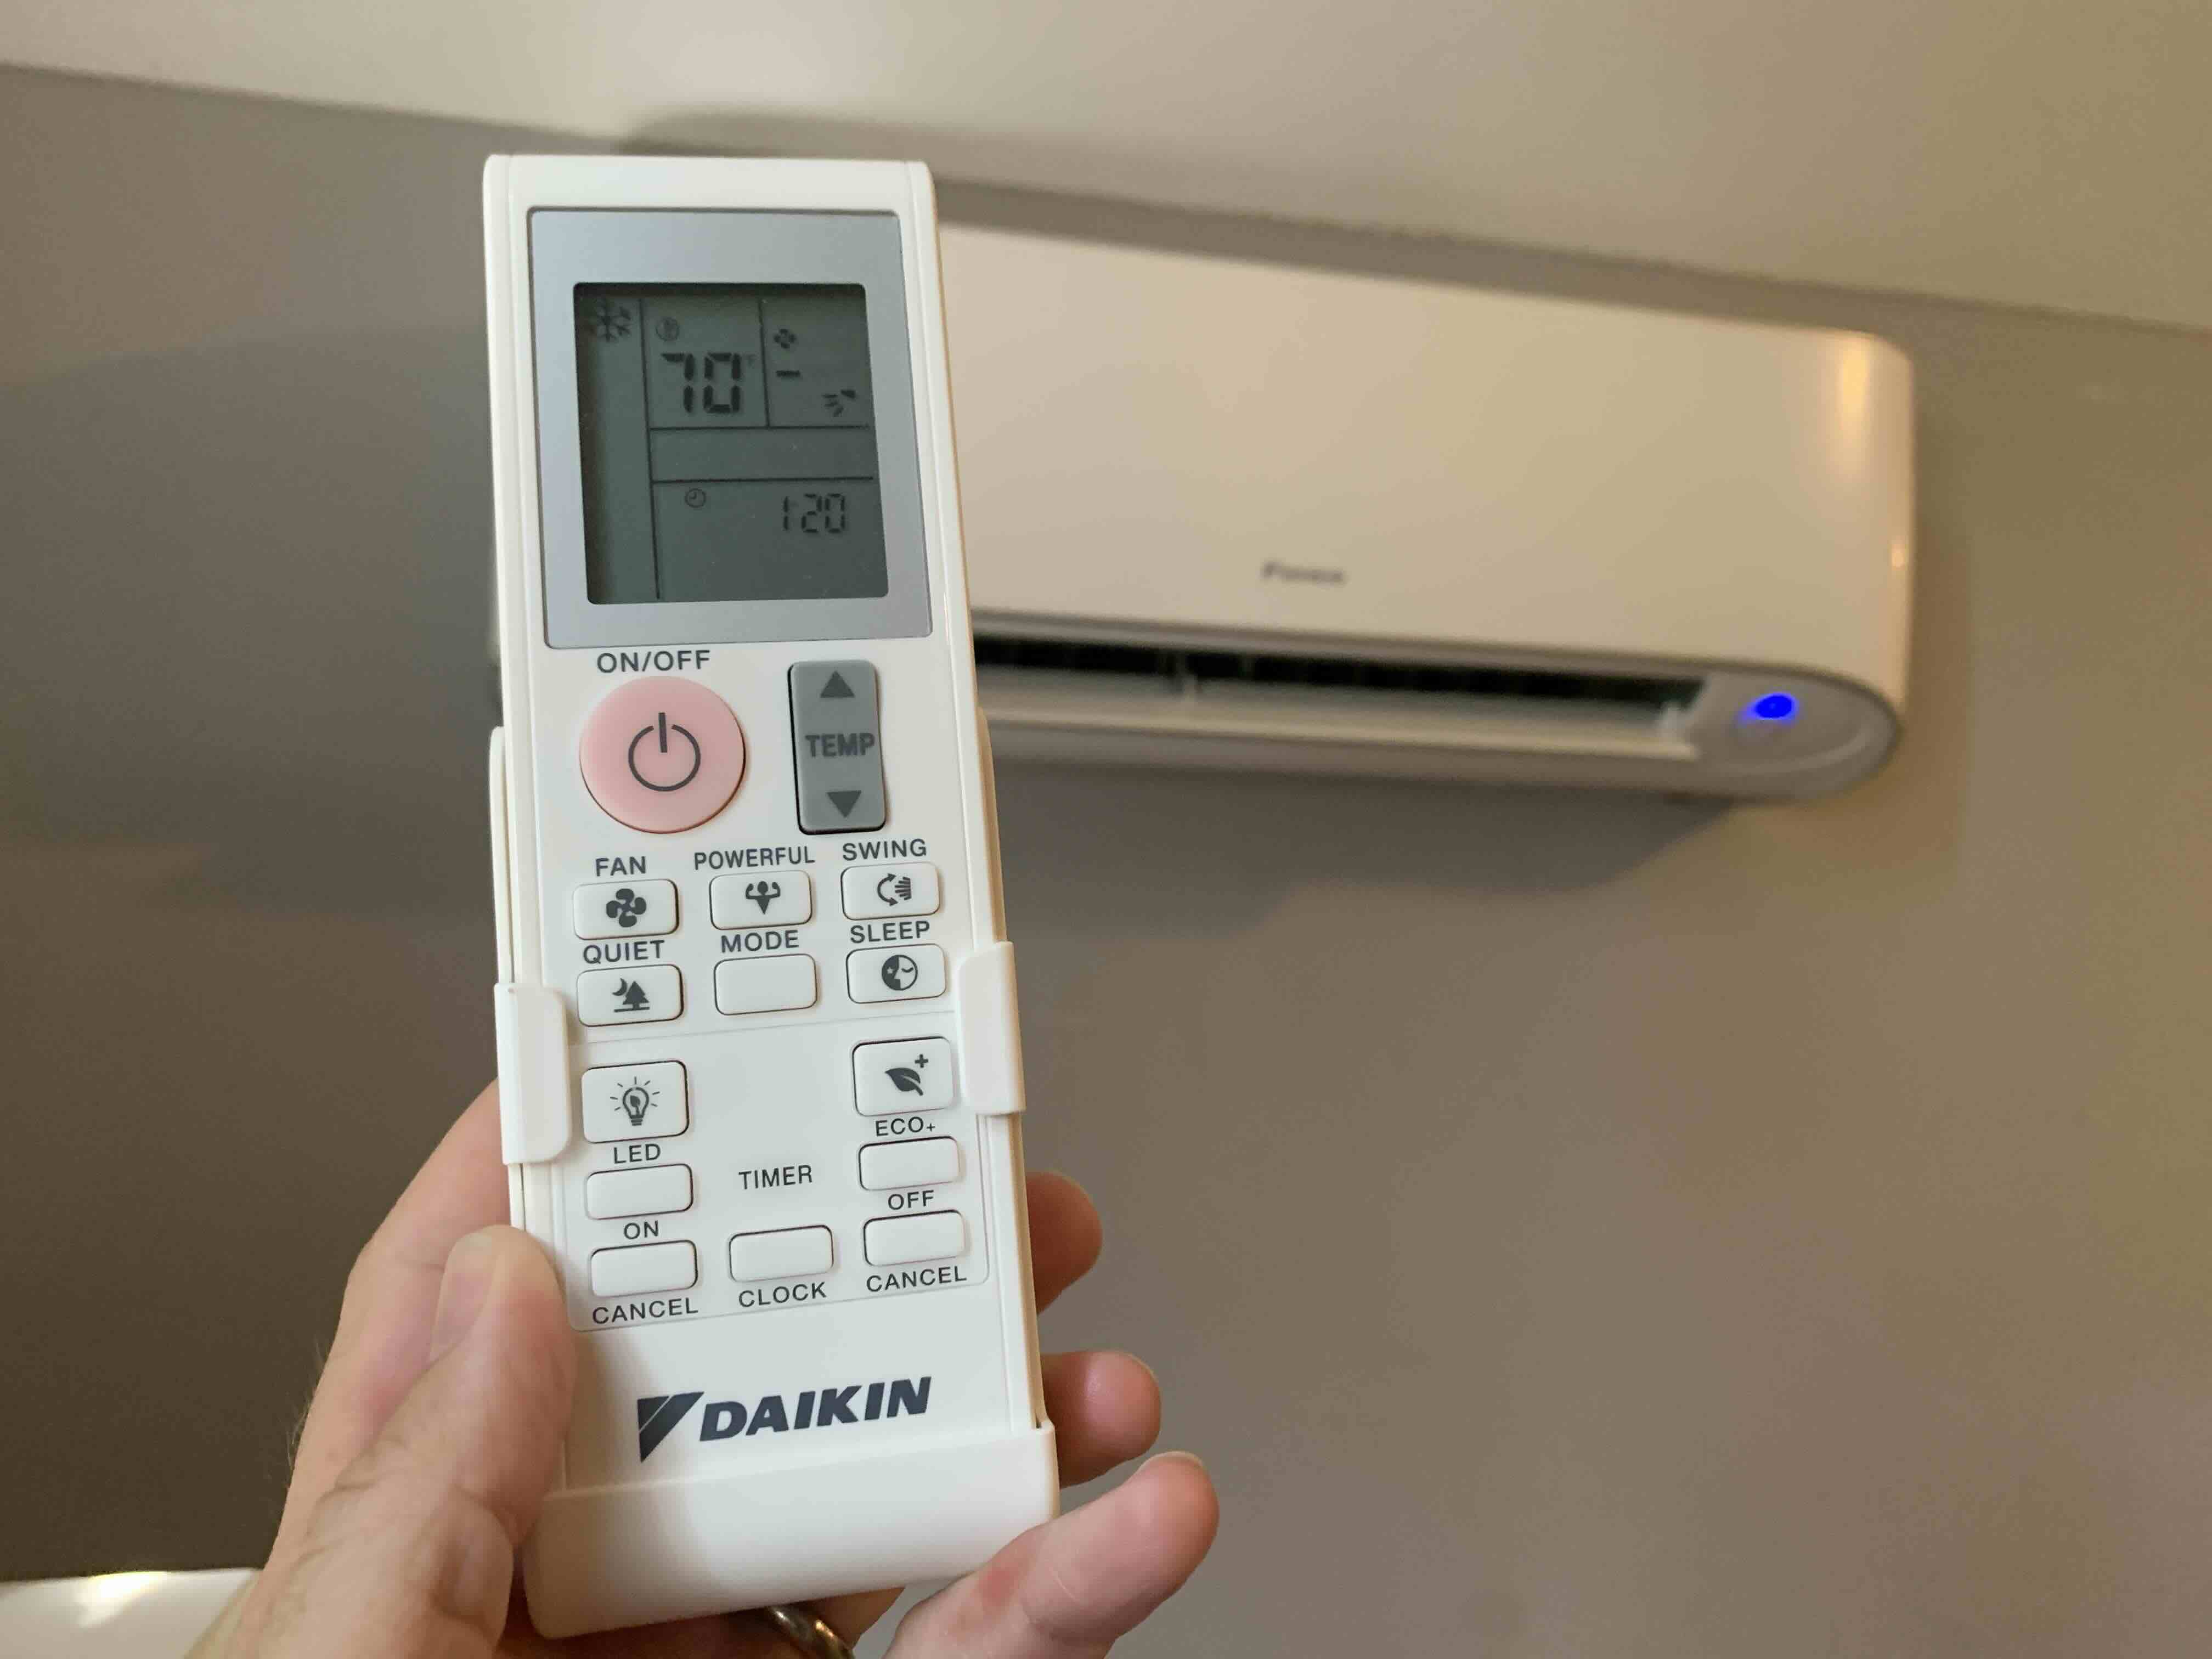 What Does “Auto” Mean On An Air Conditioner